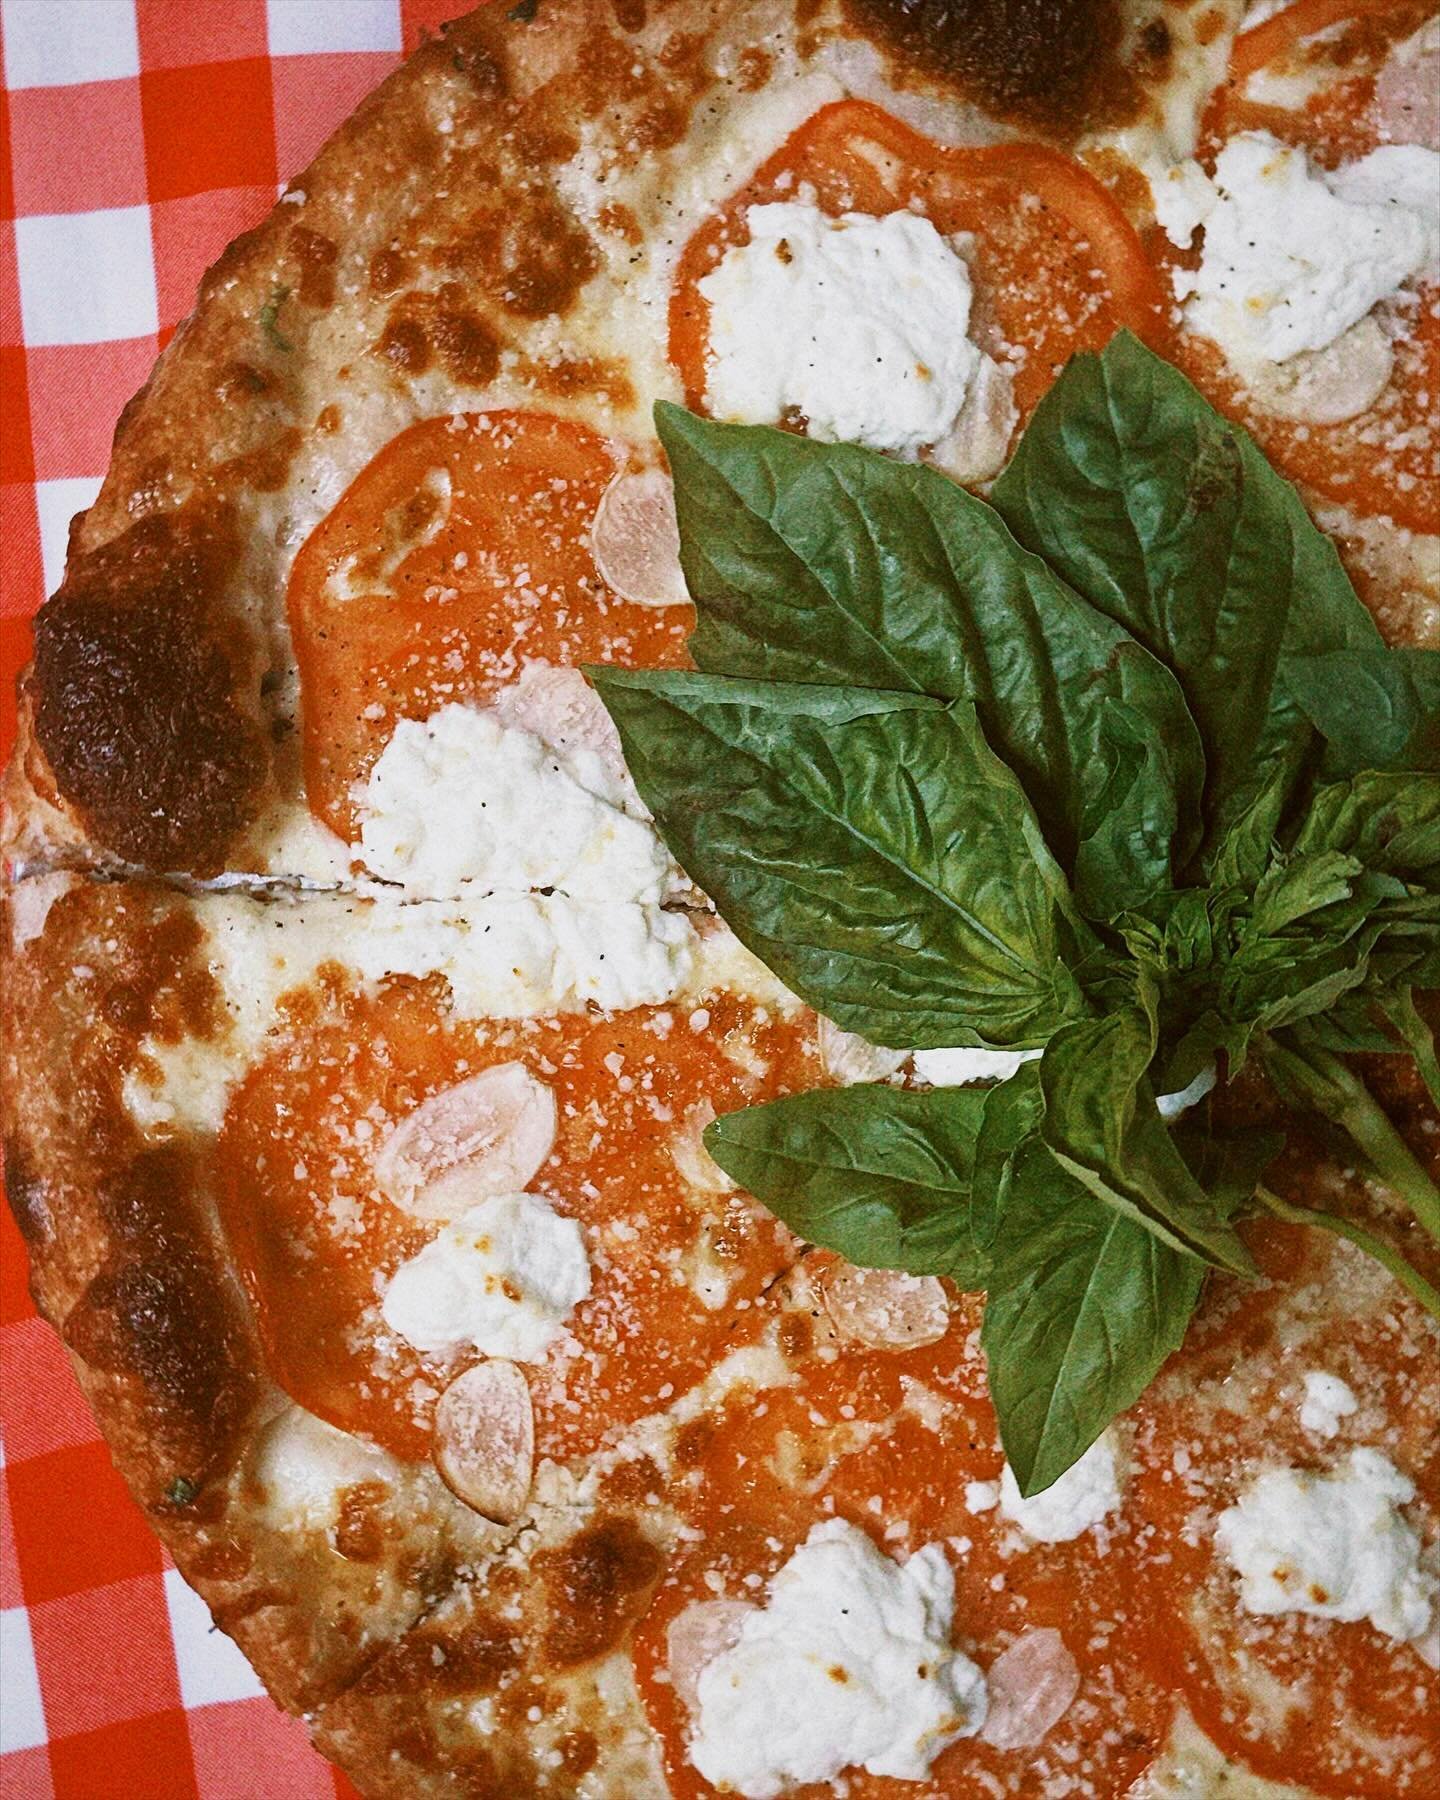 Special Pies Run Weekly, favorites get added to the Menu. This is an Ode to Ray&rsquo;s Original 27 Prince Street. Beef Steak Tomato, Garlic, Fresh ricotta. #velma #restaurant #pizza #special #notpizzaria #dinner #offmenu #brunch #nyslice #notslicesh